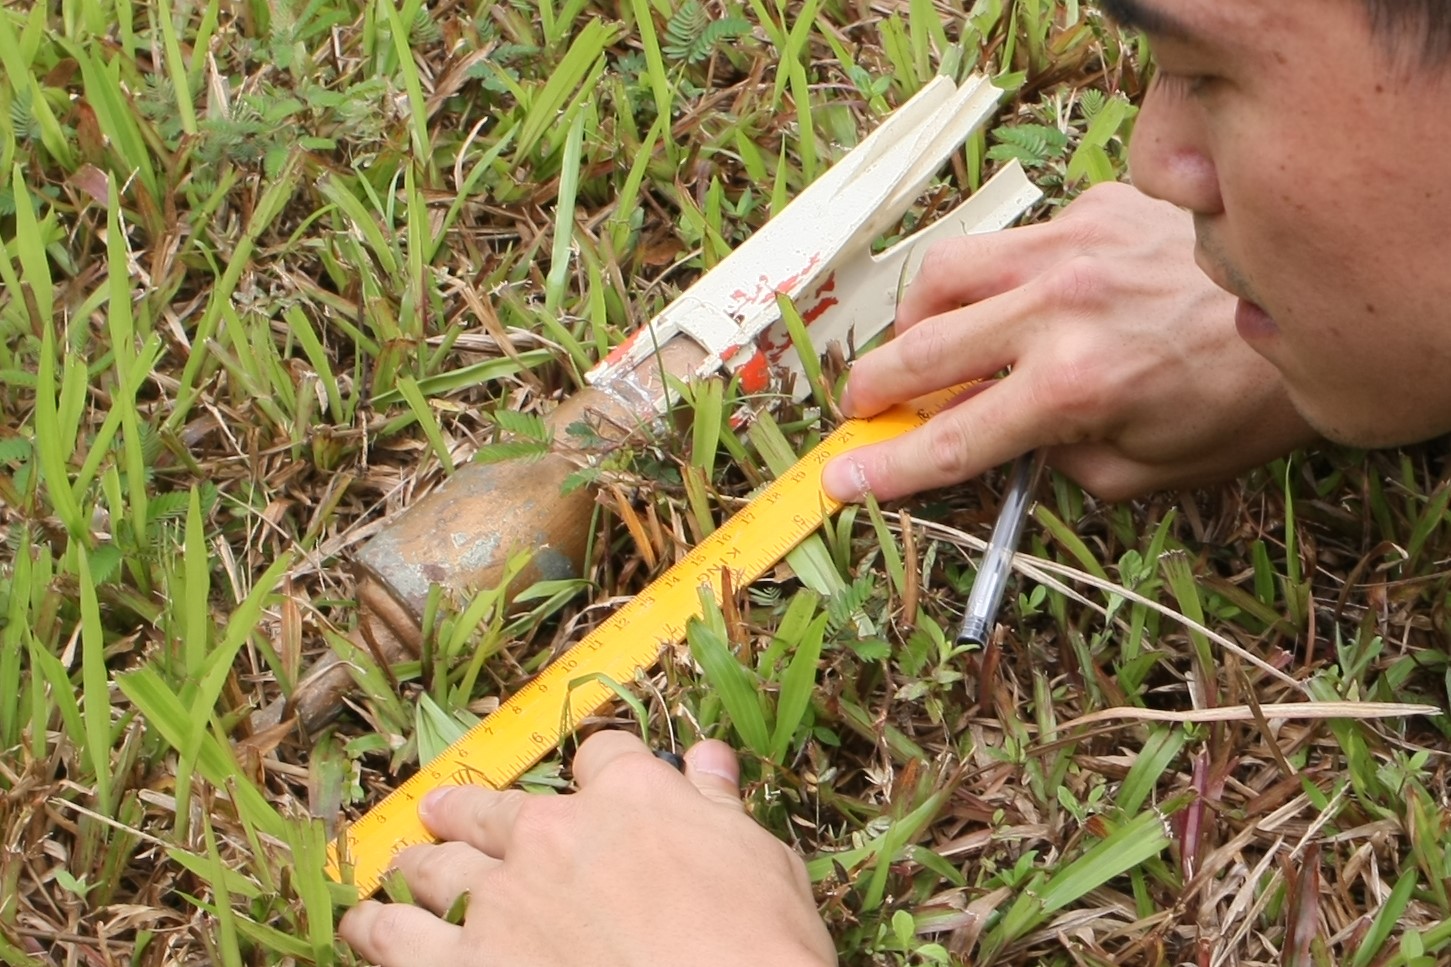 The Explosive Ordnance Reconnaissance tool kit helps operators take the necessary measurements to identify the Unexploded Ordnance.